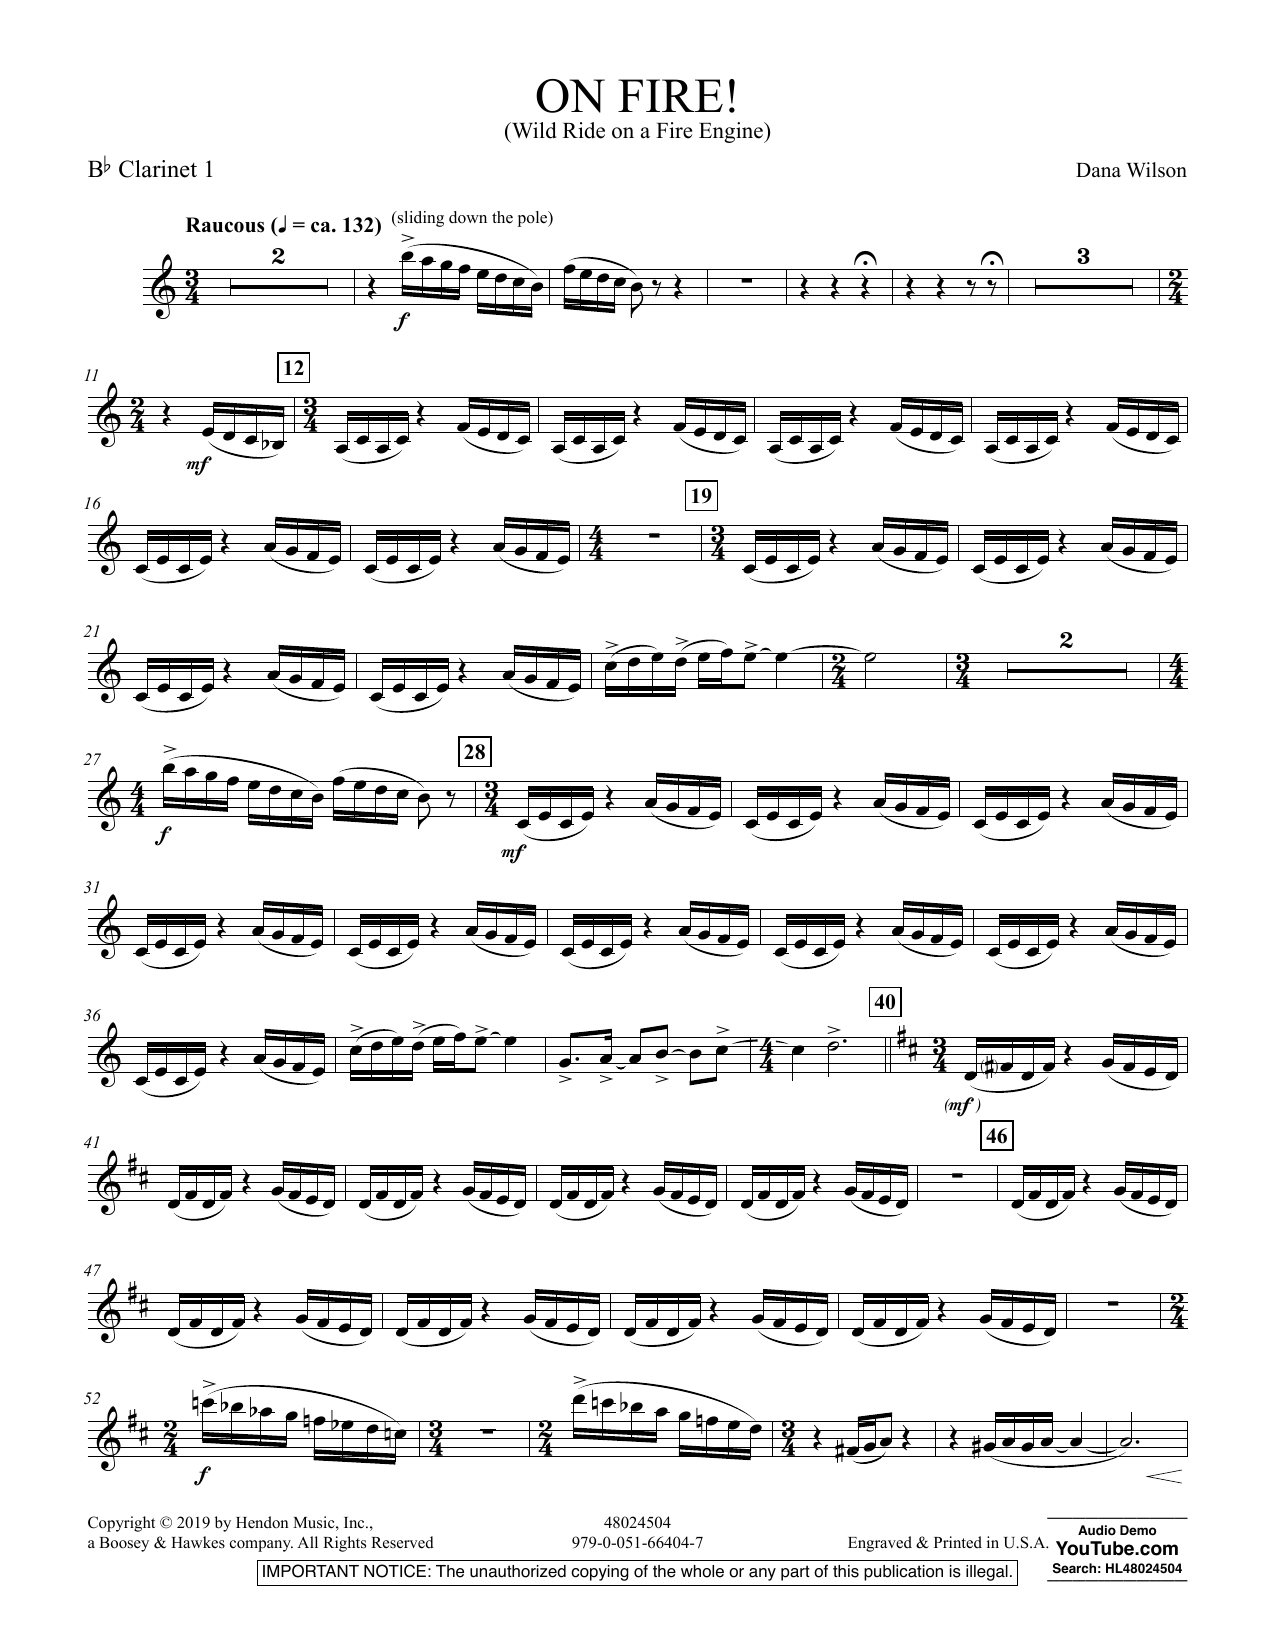 Dana Wilson On Fire! (Wild Ride on a Fire Engine) - Bb Clarinet 1 sheet music preview music notes and score for Concert Band including 2 page(s)